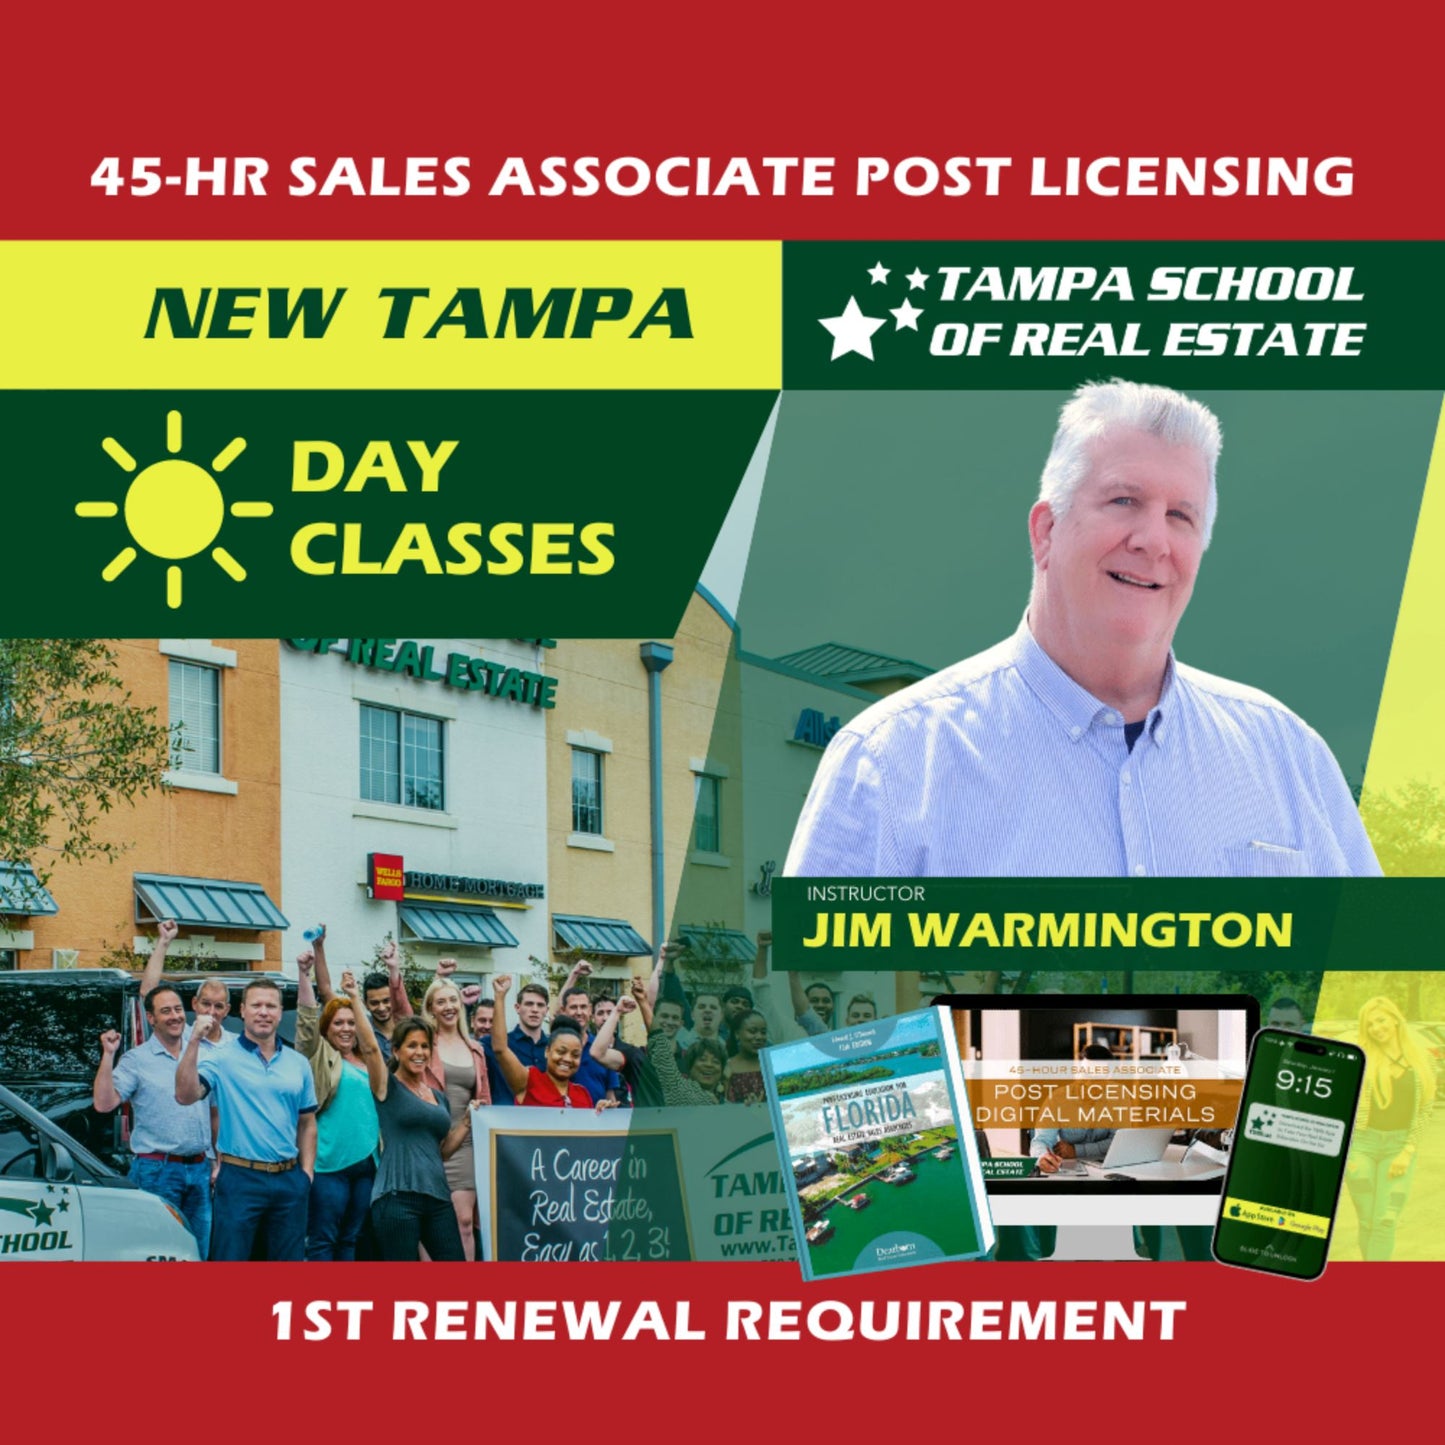 New Tampa | Sep 23 8:30am | 45-HR FL Post Licensing Course SLPOST TSRE New Tampa | Tampa School of Real Estate 